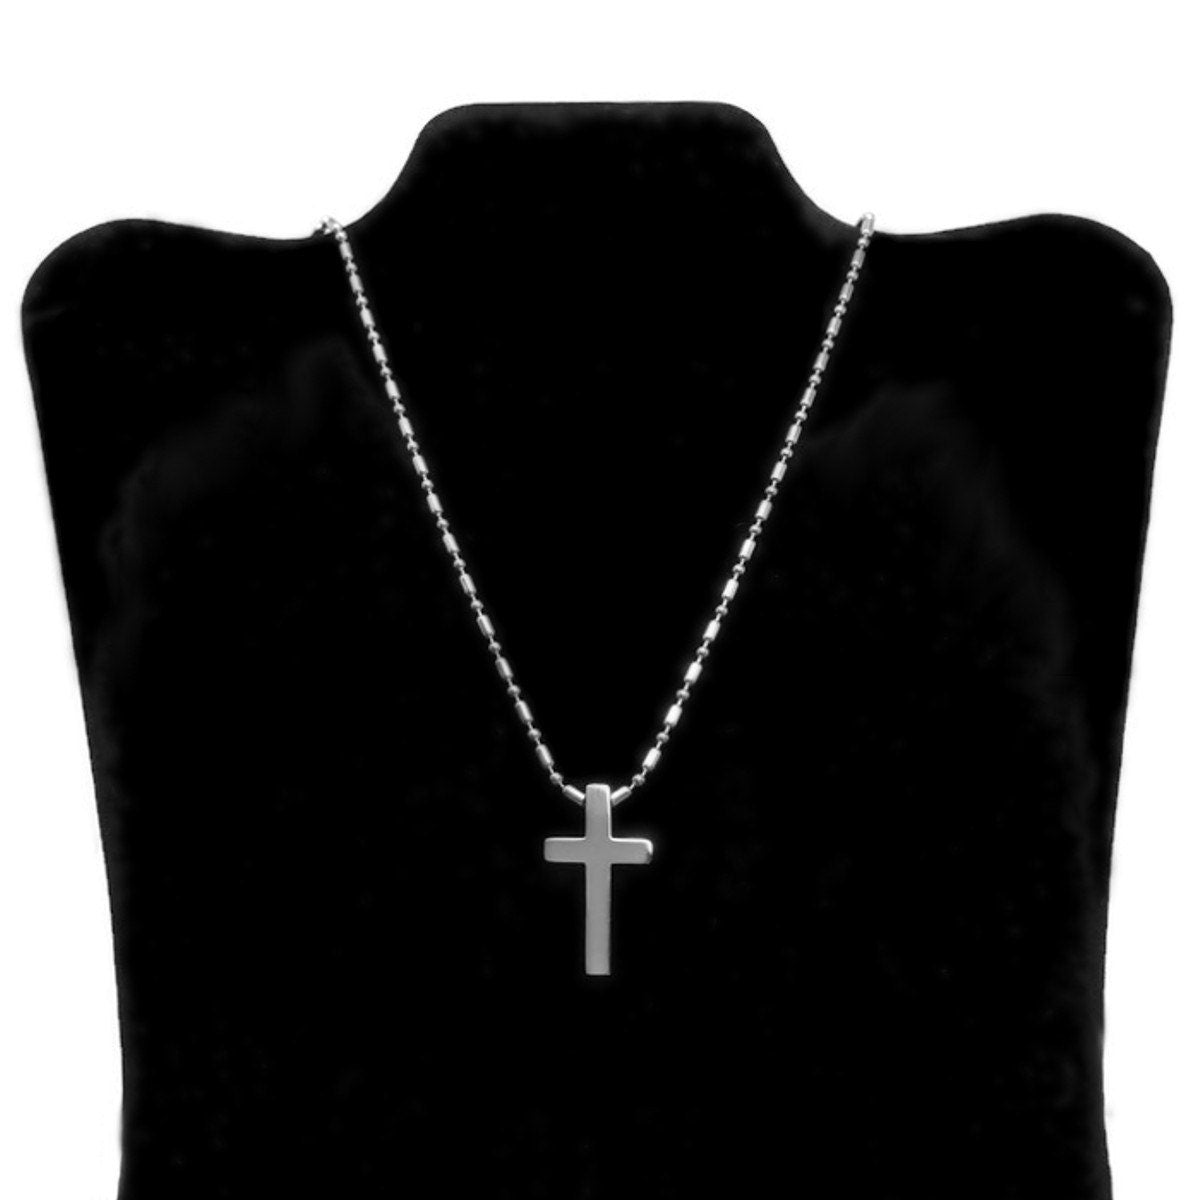 Stainless Steel Cross Necklace, Religious Jewelry, Catholic Gifts for Men, Military Bead Chain, Silver Man Jewellery, Love, Faith